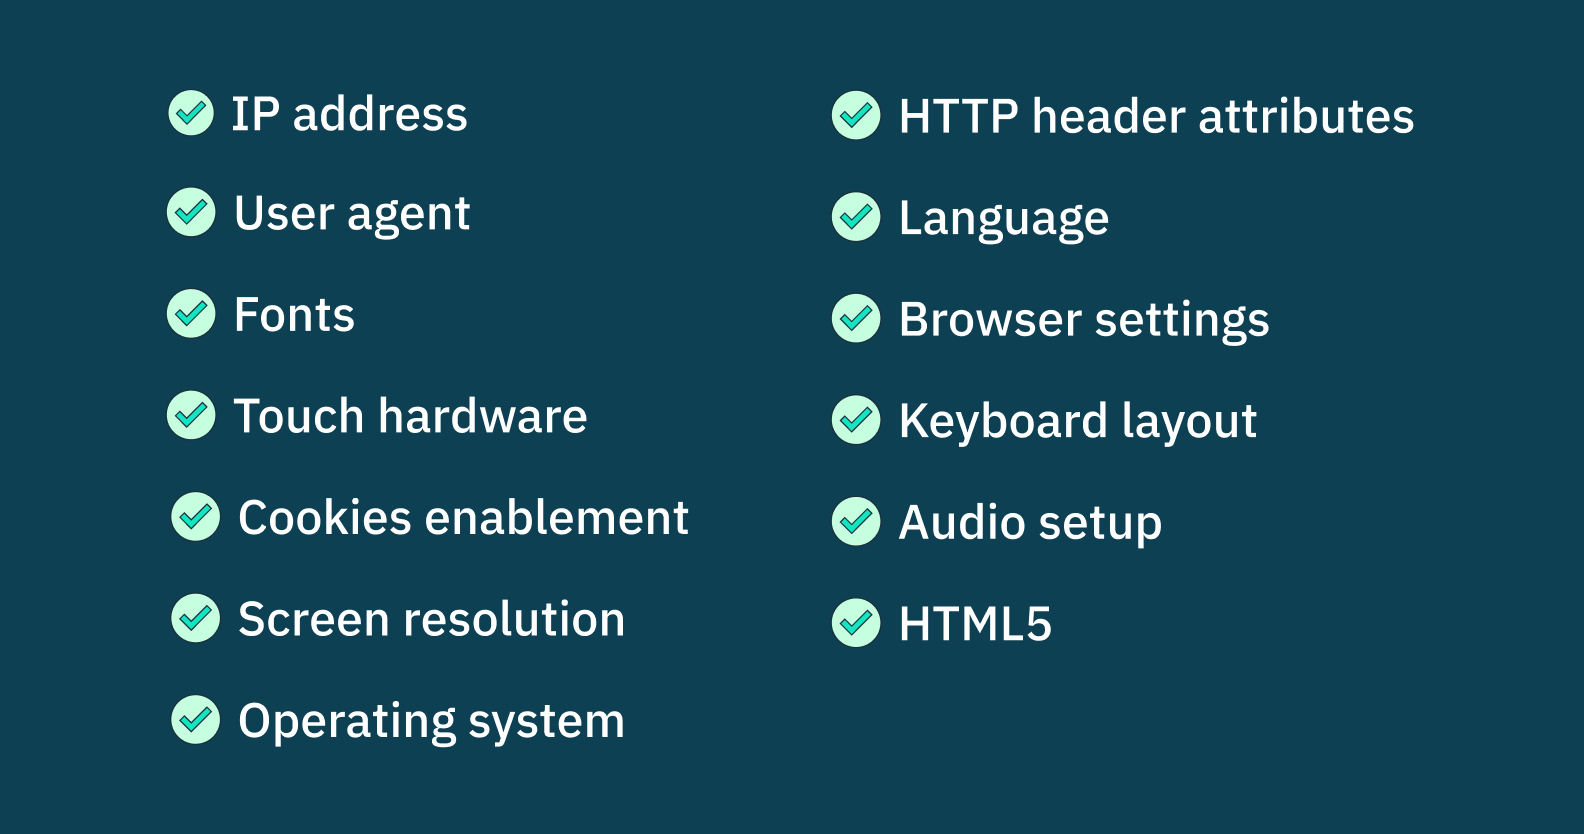 A list that includes the following terms: IP address; user agent; fonts; touch hardware; cookies enablement; screen resolution; operating system; HTTP header attributes; language; browser settings; keyboard layout; audio setup; HTML5